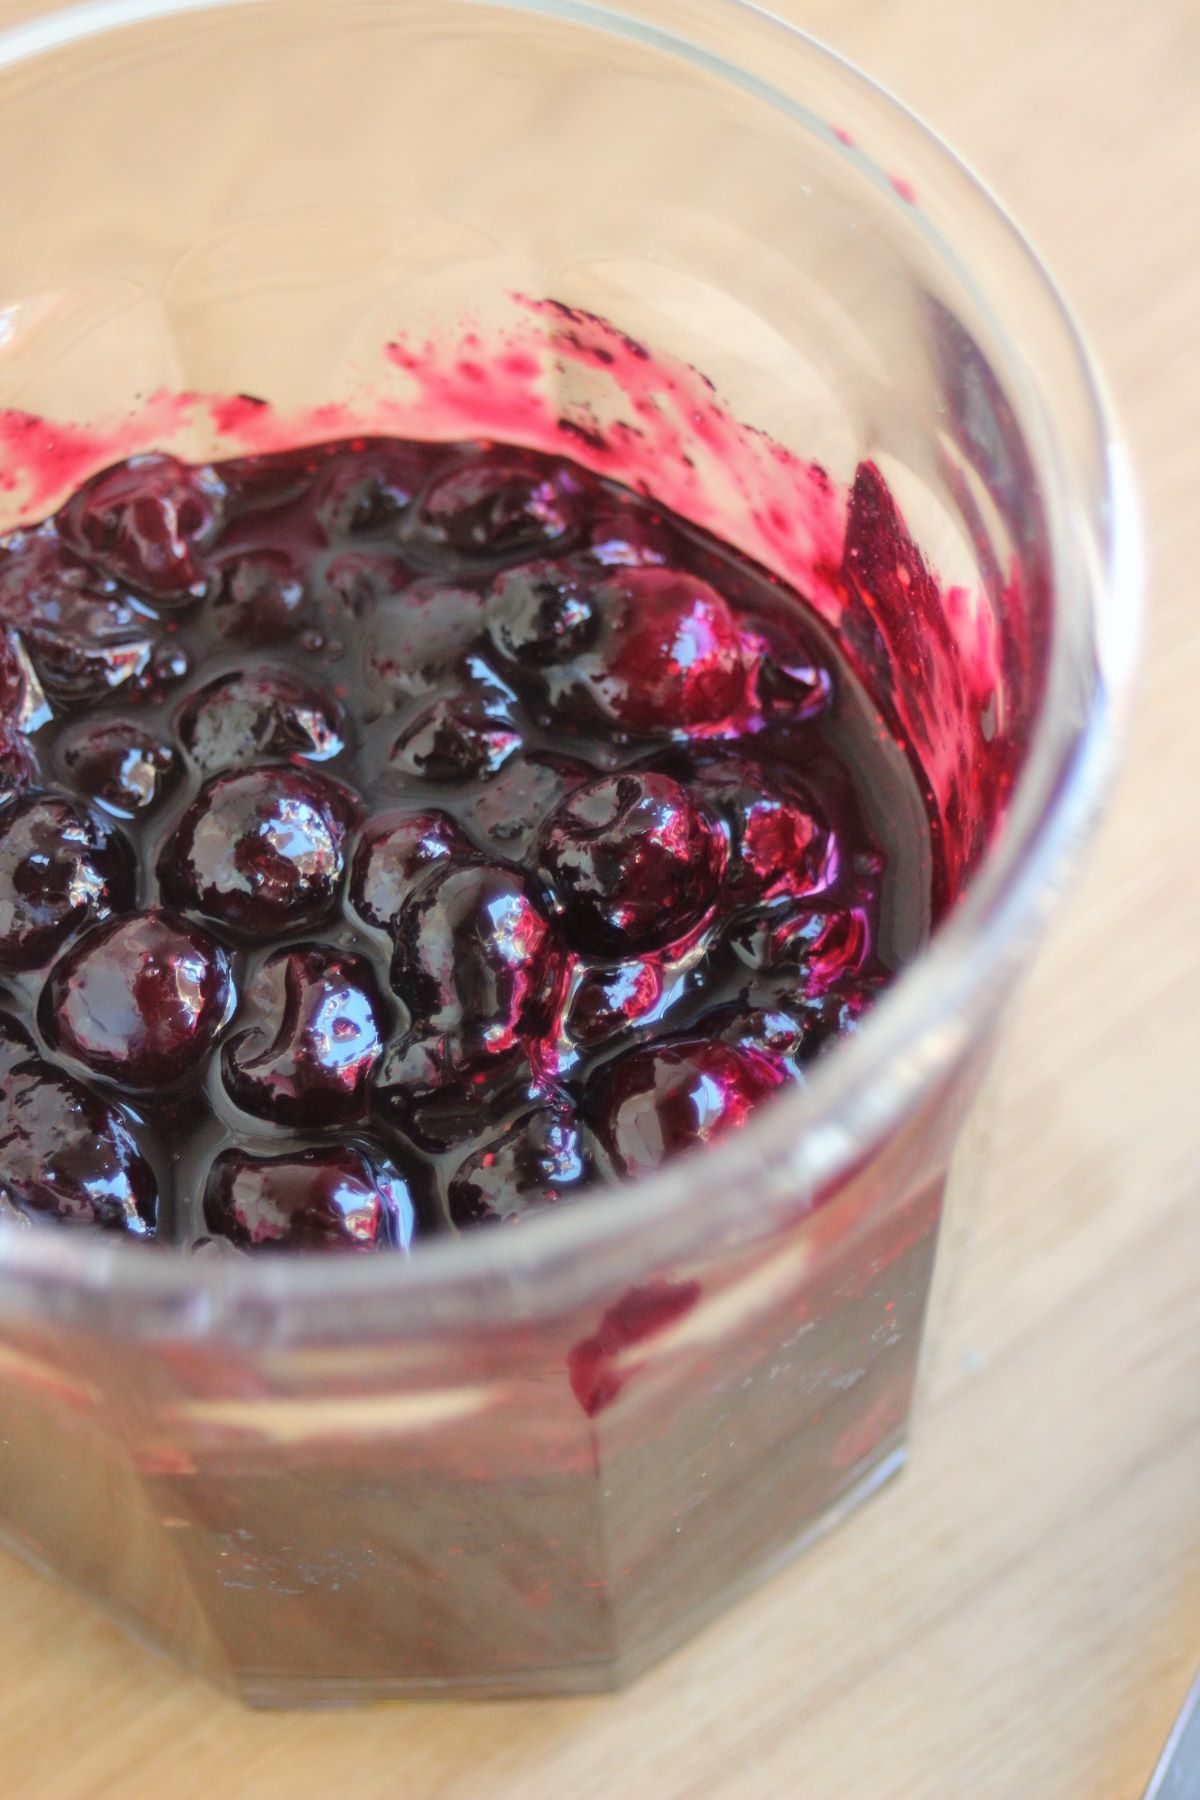 A jar with blueberry sauce.